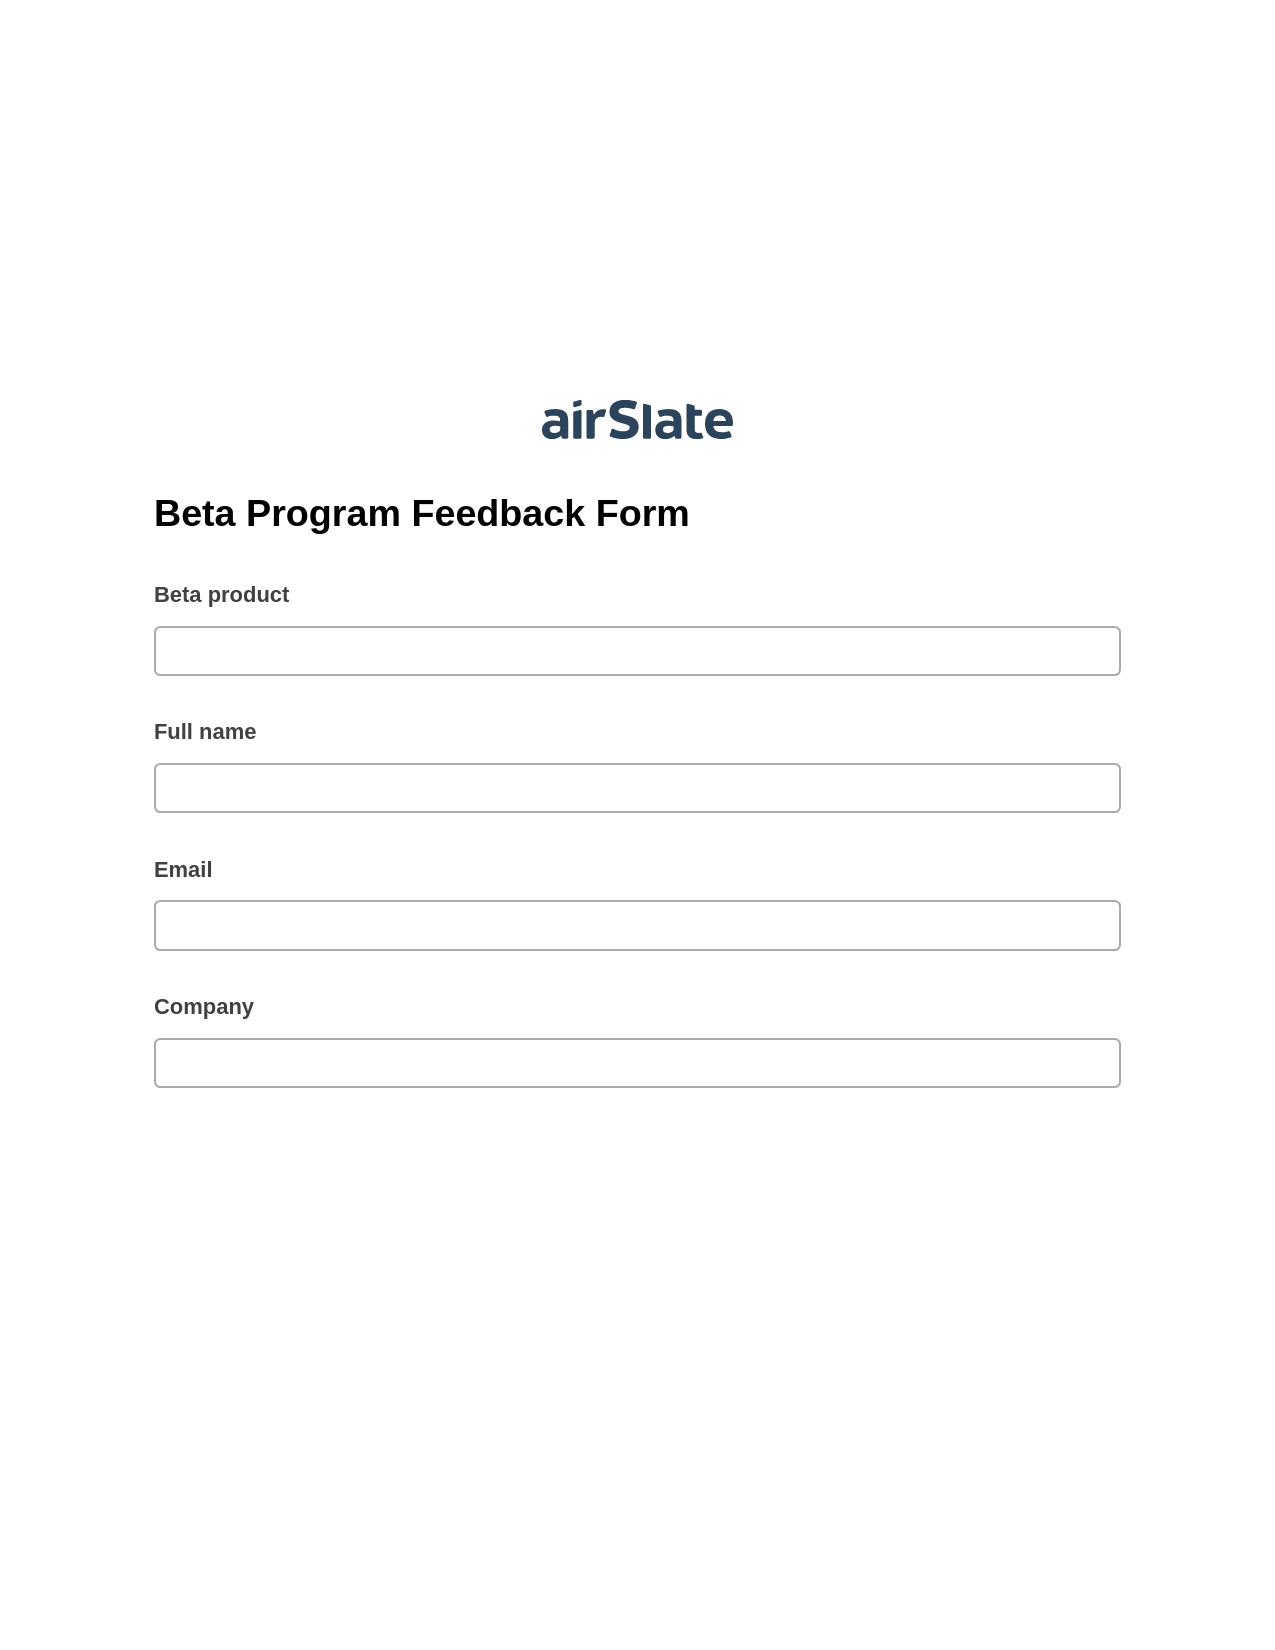 Multirole Beta Program Feedback Form Pre-fill from NetSuite Records Bot, Hide Signatures Bot, Dropbox Bot